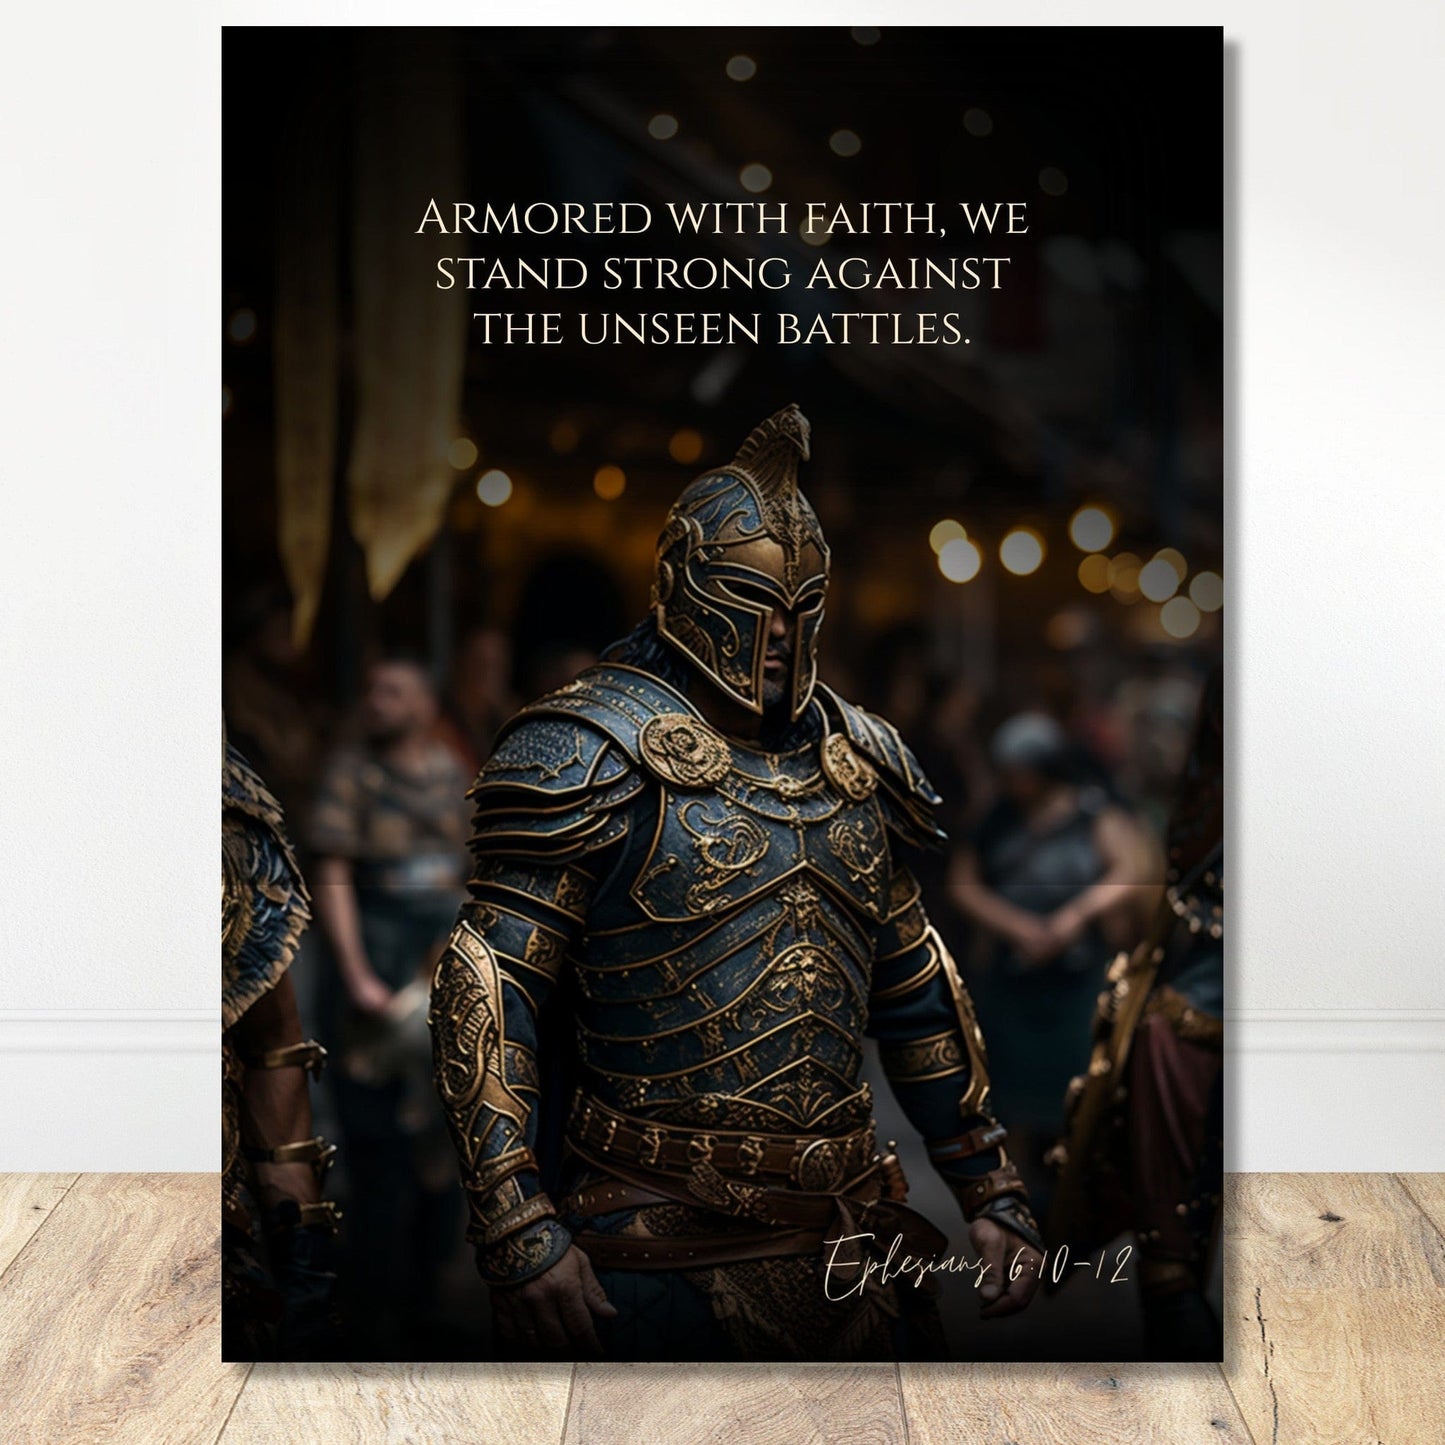 Coffee With My Father Print Material 30x40 cm / 12x16″ / Premium Matte Paper Poster / - The Unseen Battles: Ephesians 6:10-12 - Artwork